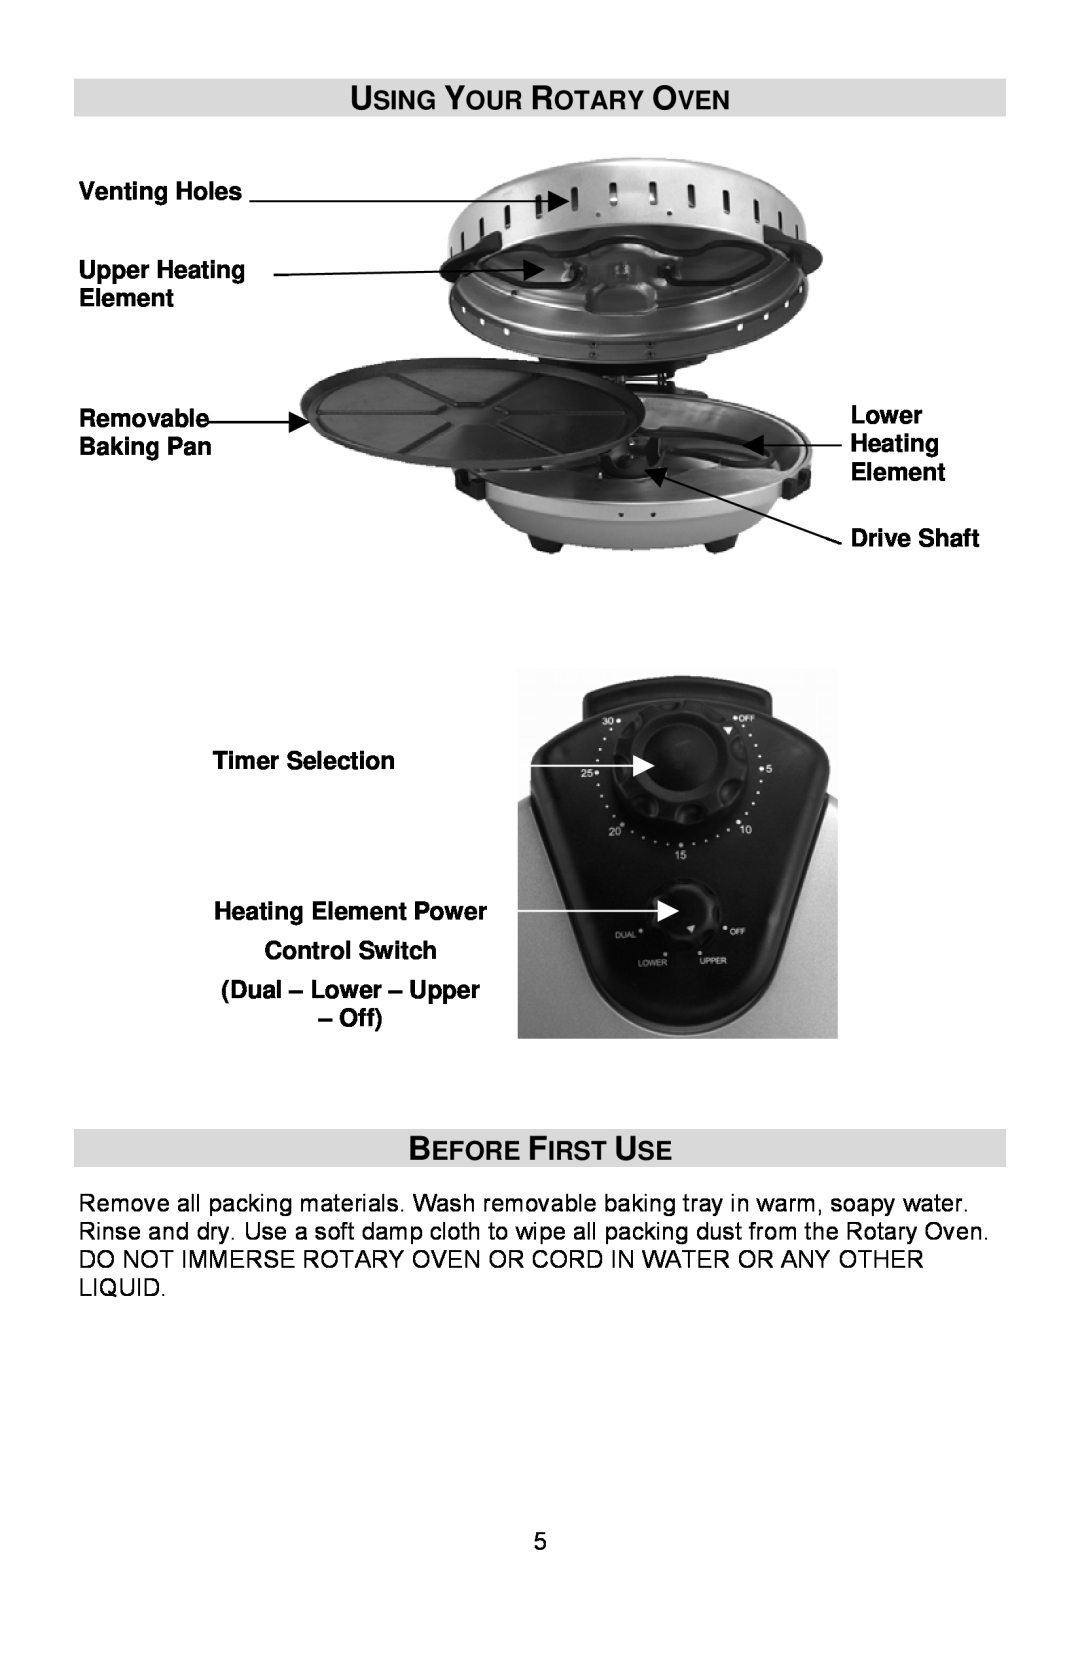 West Bend instruction manual Using Your Rotary Oven, Before First Use, Venting Holes Upper Heating Element Removable 